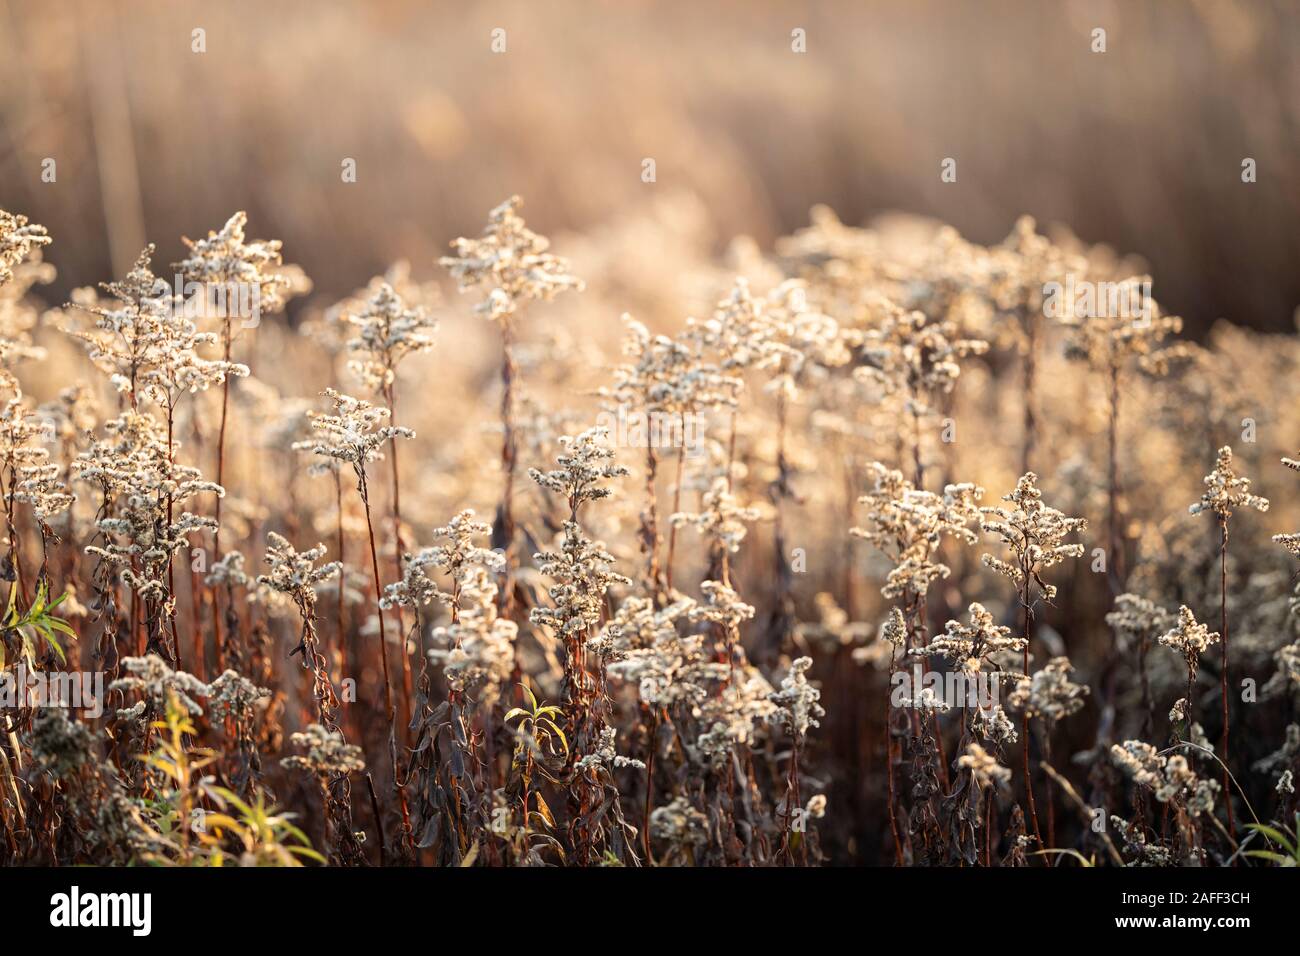 Dry faded flowers of Goldenrod or Solidago canadensis by the sea. Natural soft colors of late autumn, november sun golden hour. Stock Photo